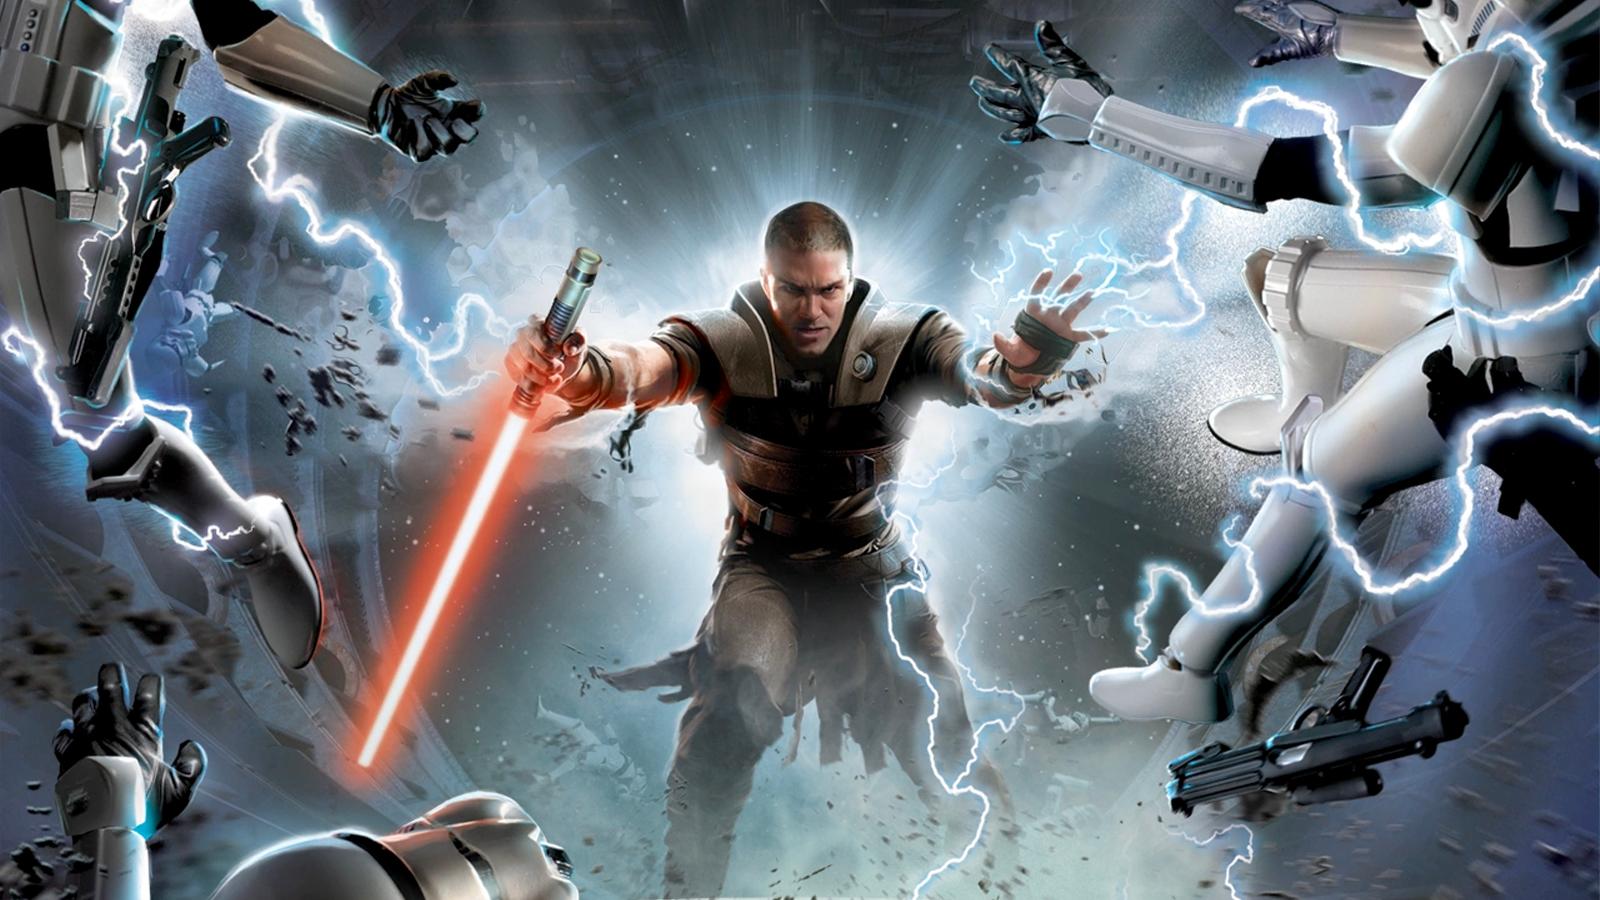 star wars force unleashed key art of main character shooting lighting at storm troopers while holding a red lightsaber